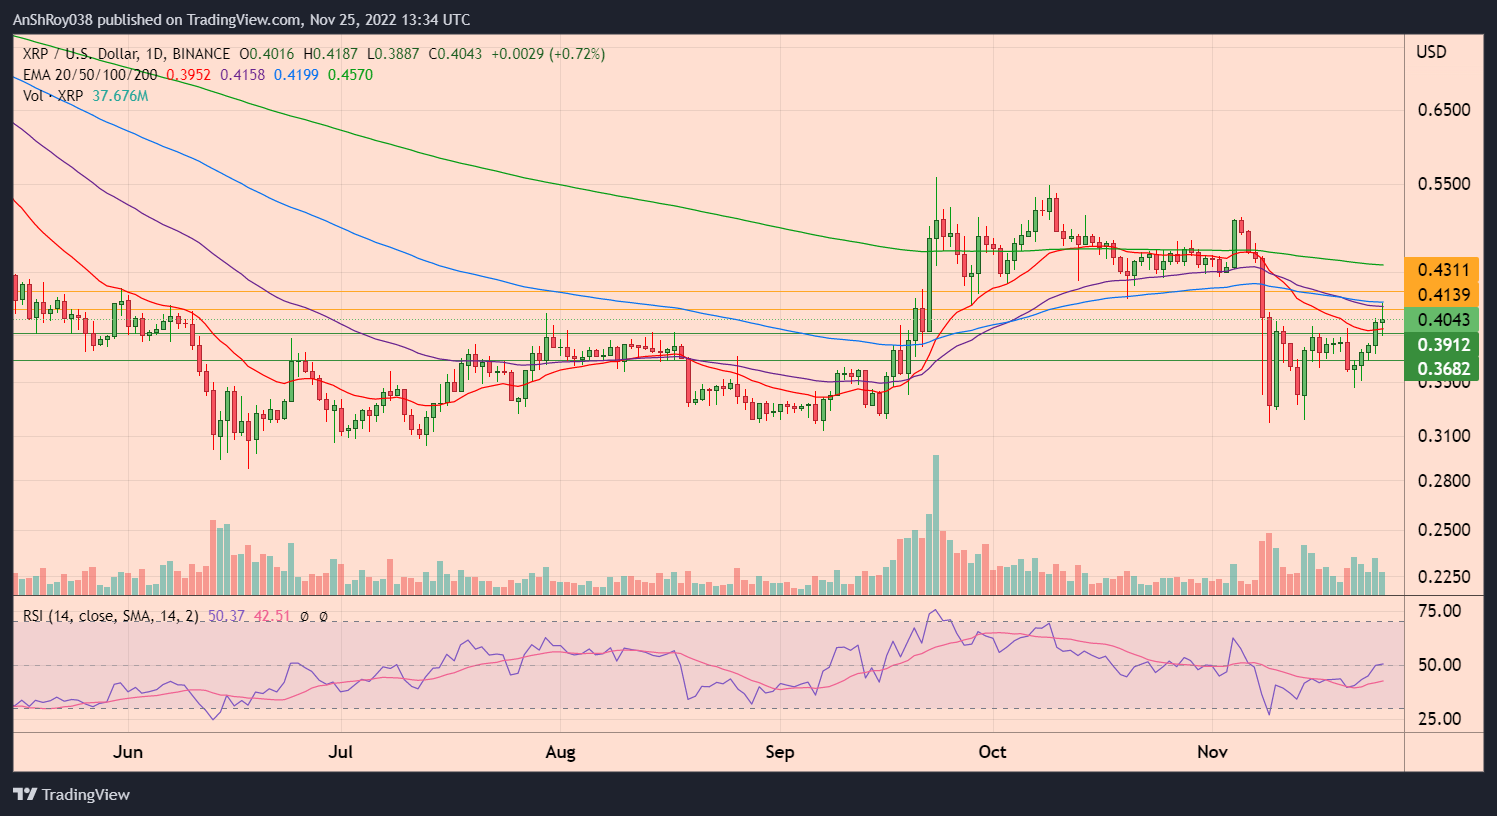 XRPUSD daily chart with RSI